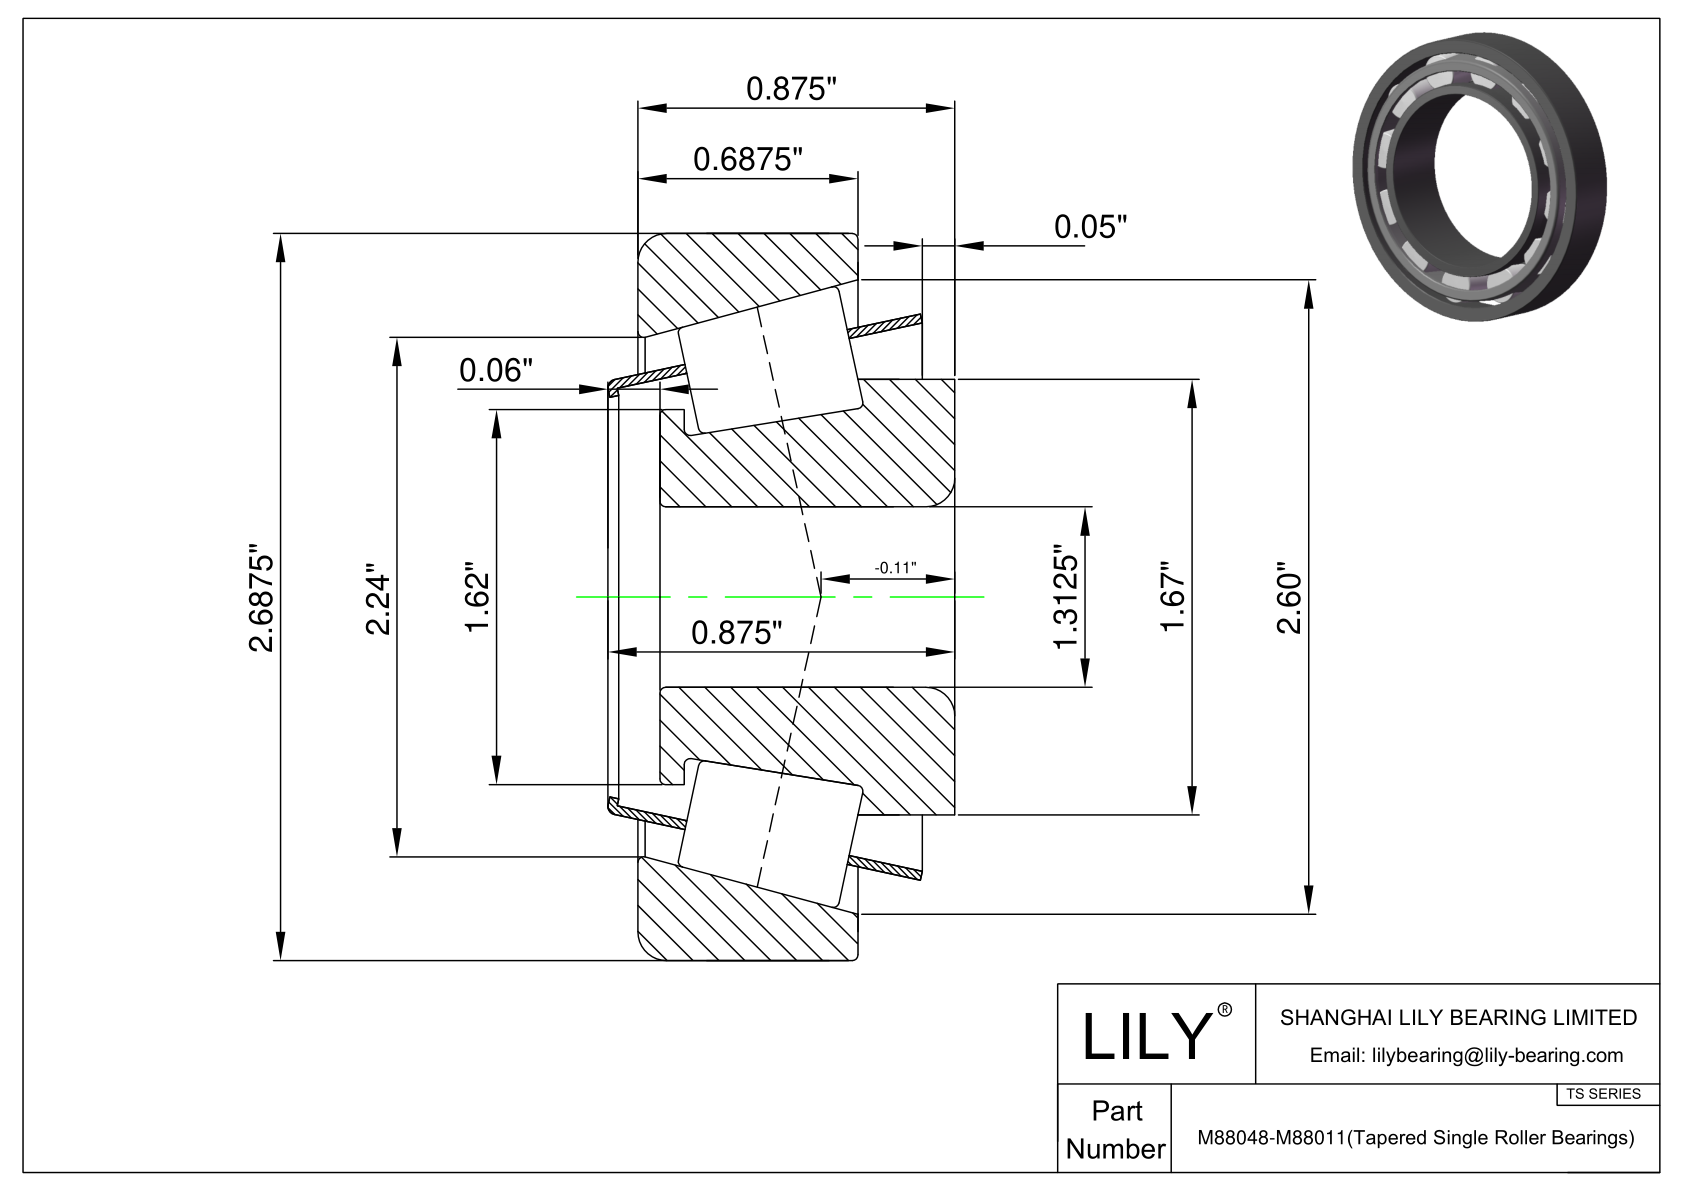 M88048-M88011 TS (Tapered Single Roller Bearings) (Imperial) cad drawing